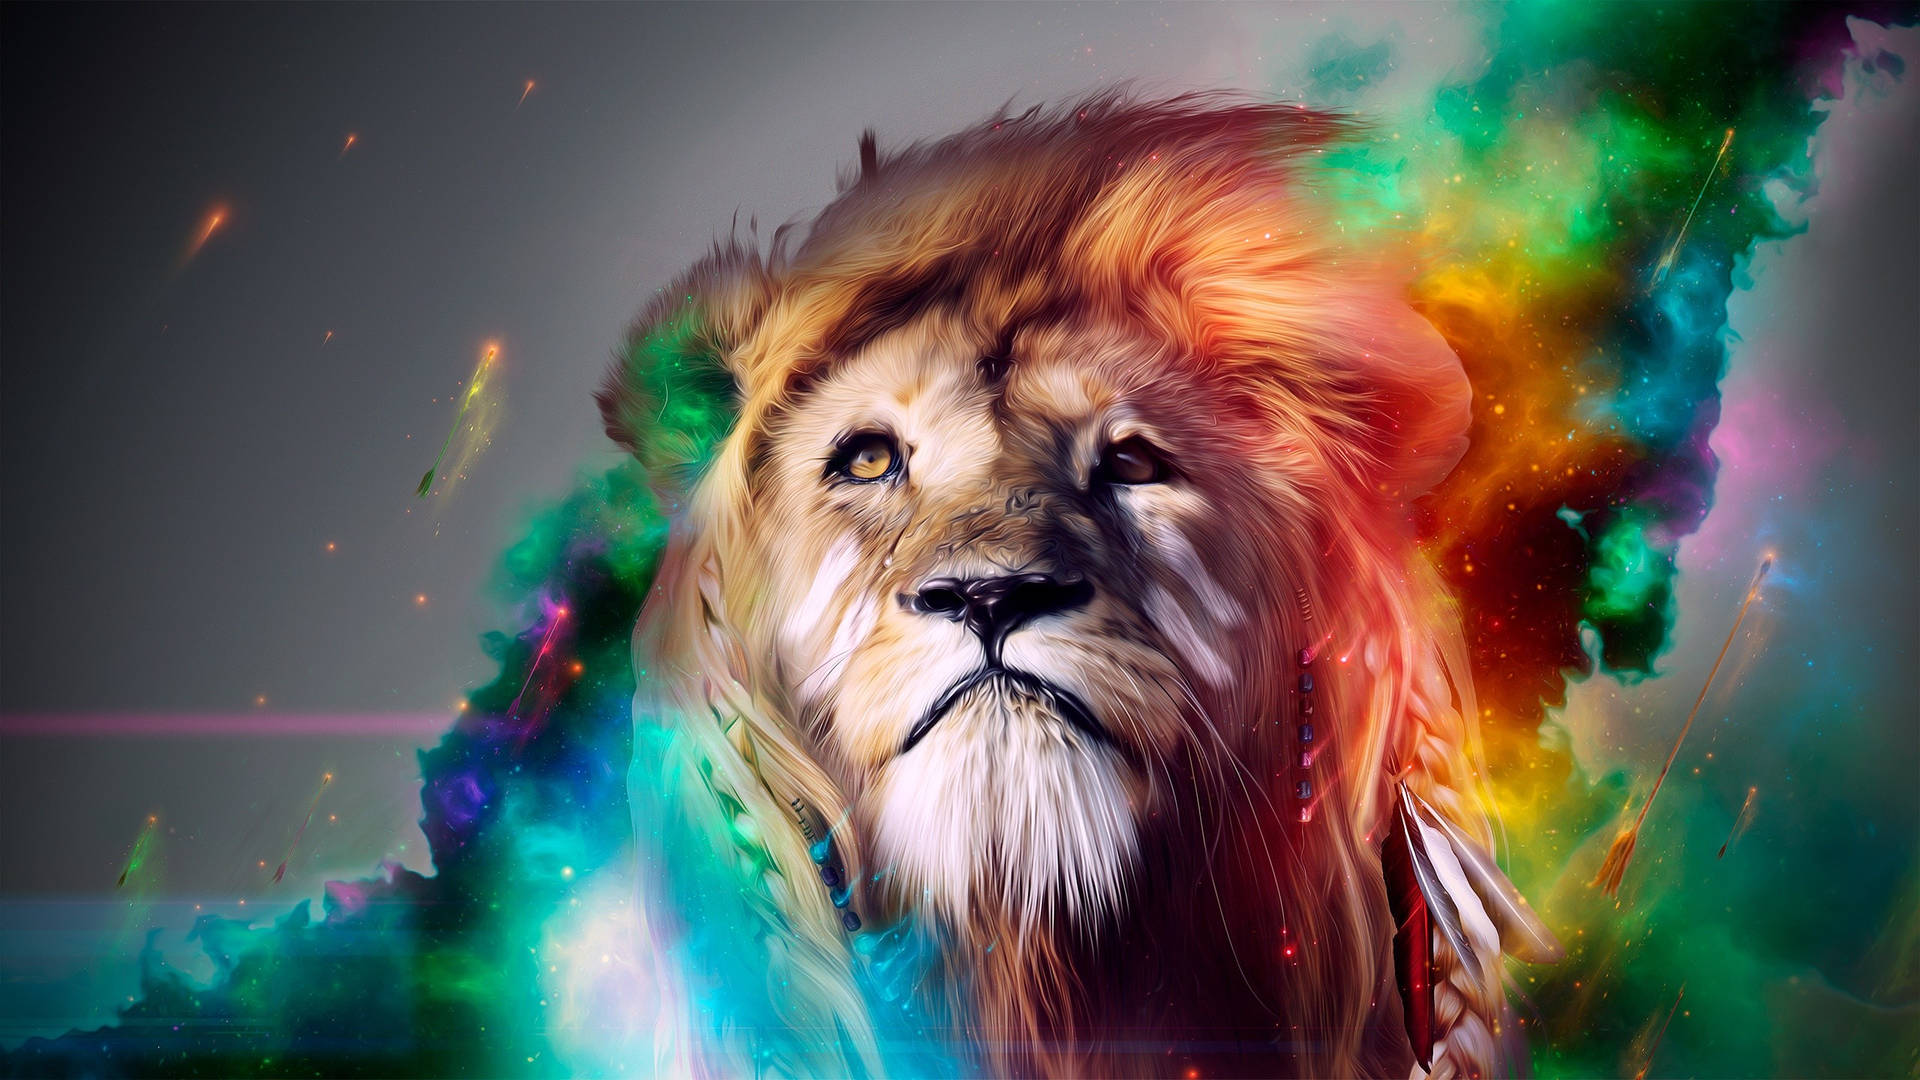 Lion Head With Colorful Smoke Wallpaper